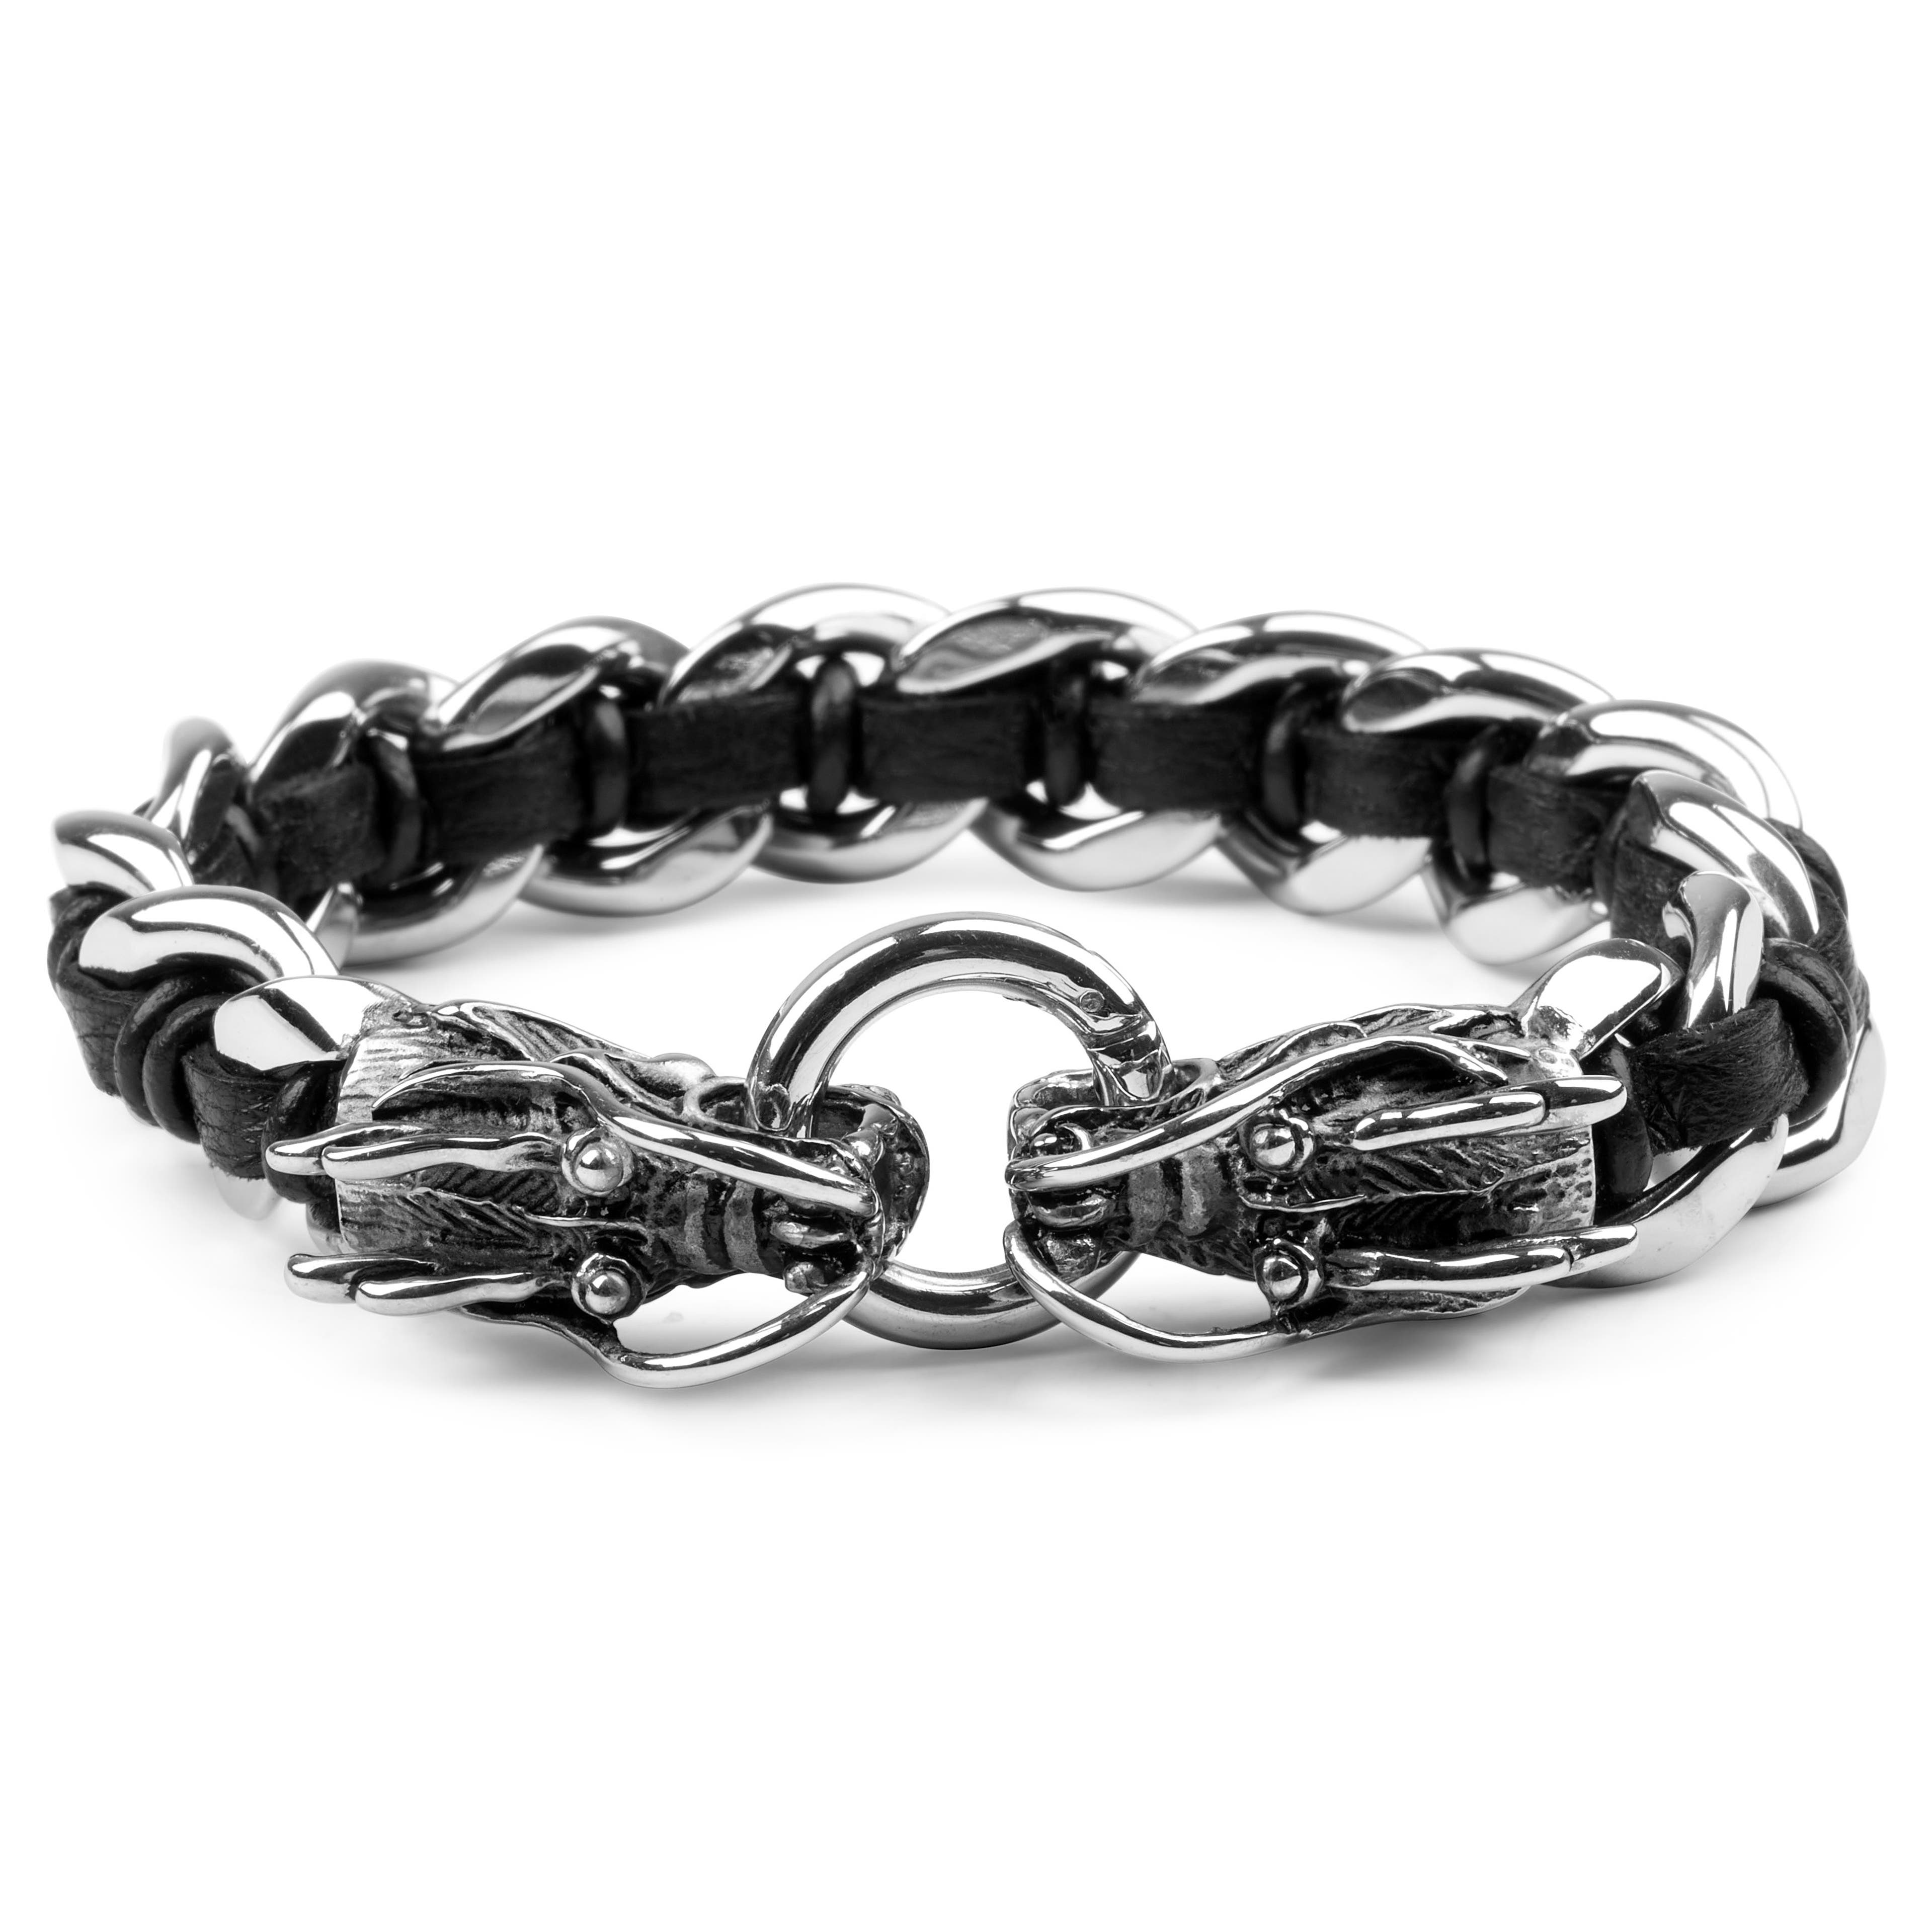 Black Leather & Stainless Steel Curb Chain Dragon Bracelet